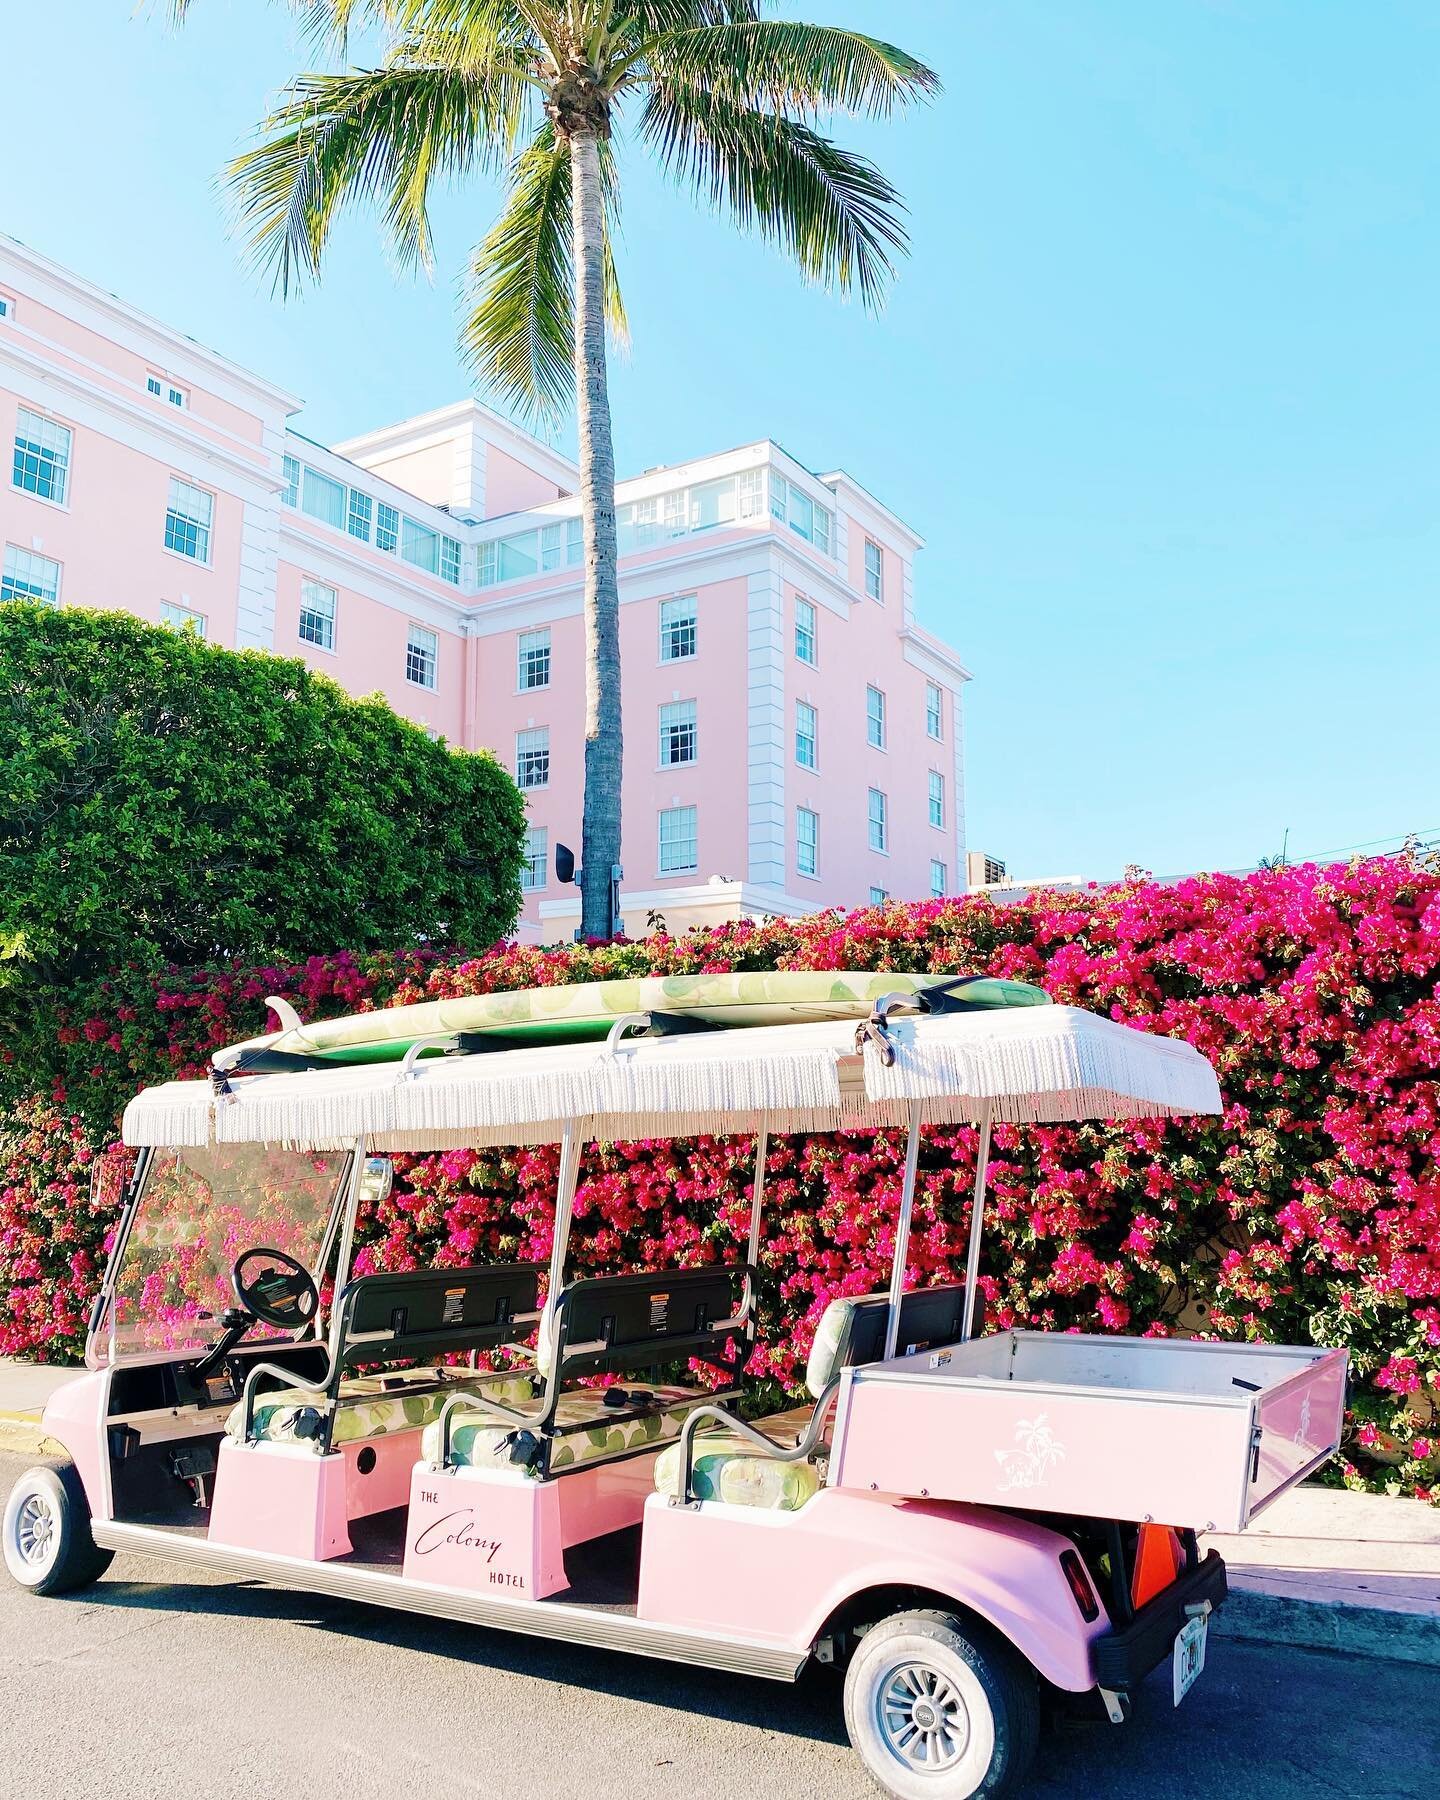 happy friday from the sunshine state and the most adorable beach buggy in town ☀️ @thecolonypalmbeach